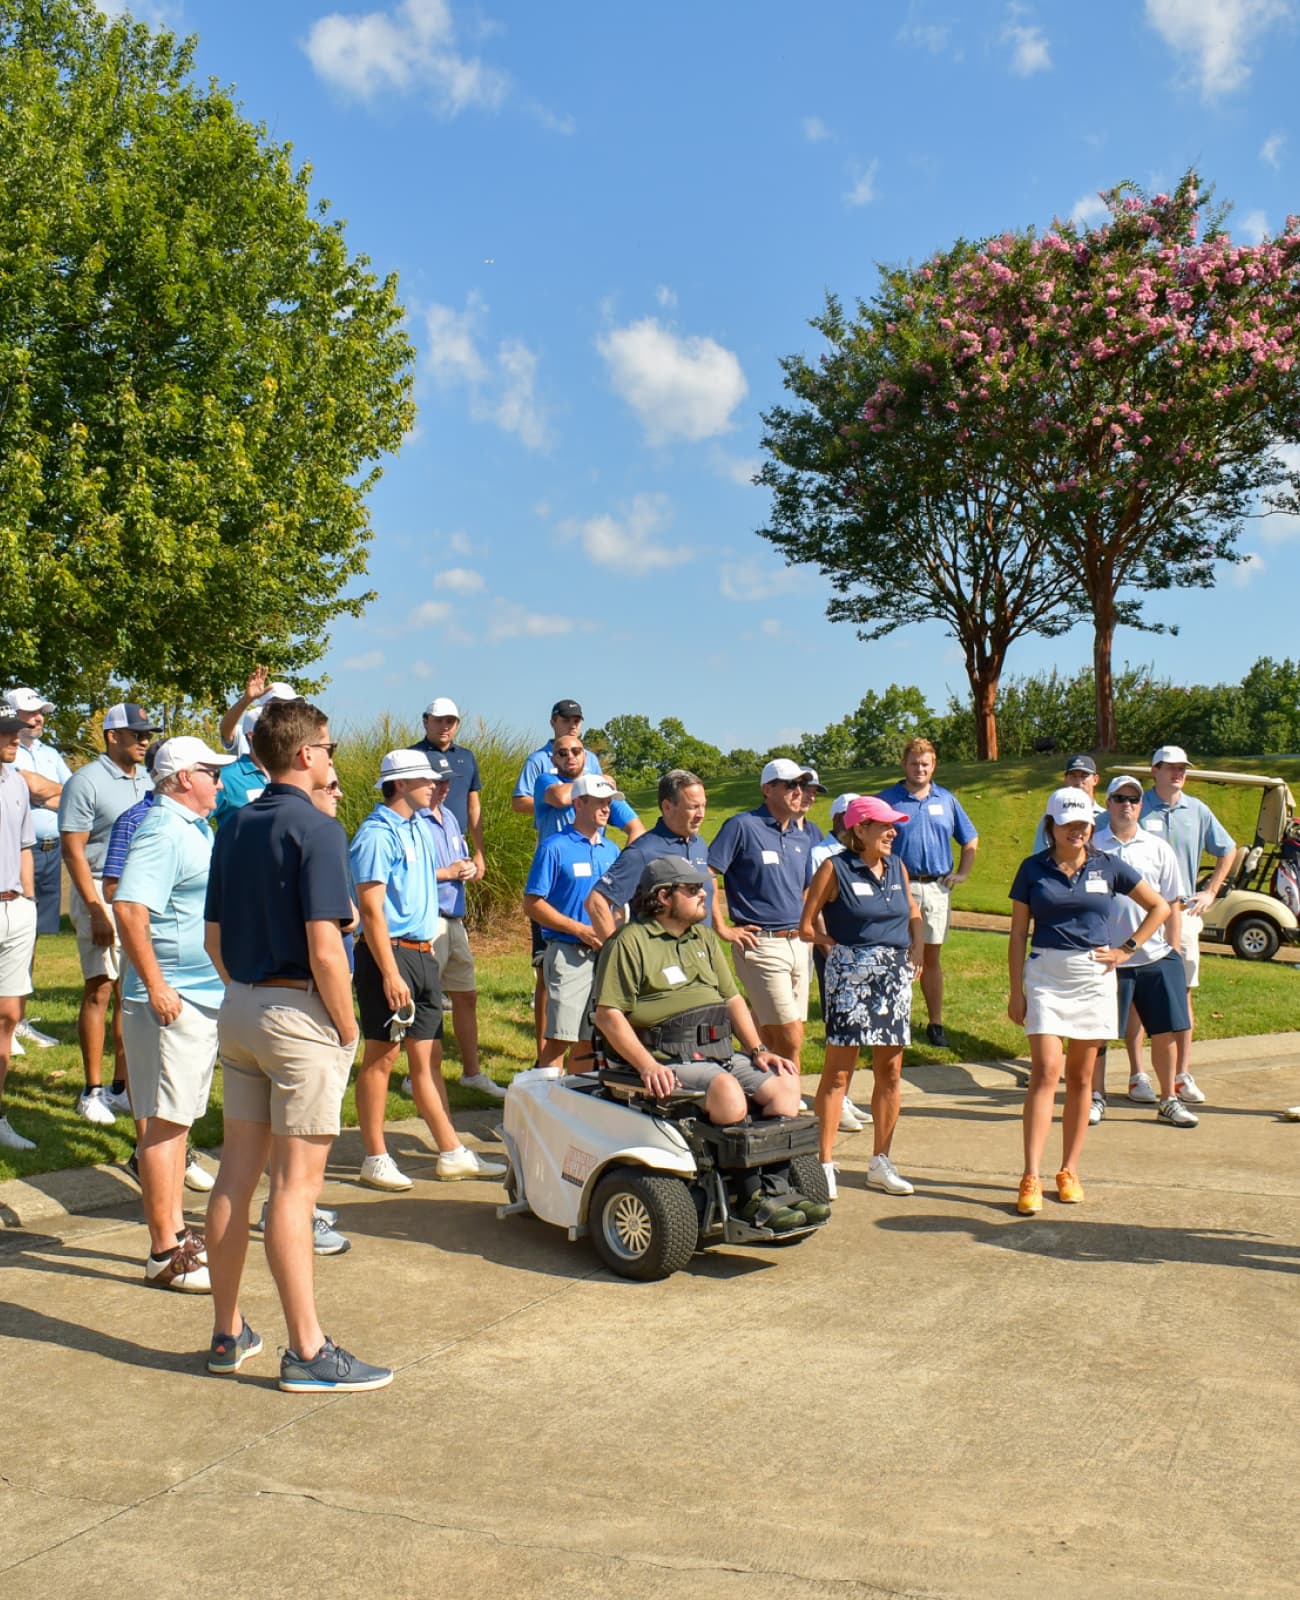 A large group gathered around a golfer in an accesibile golf cart.